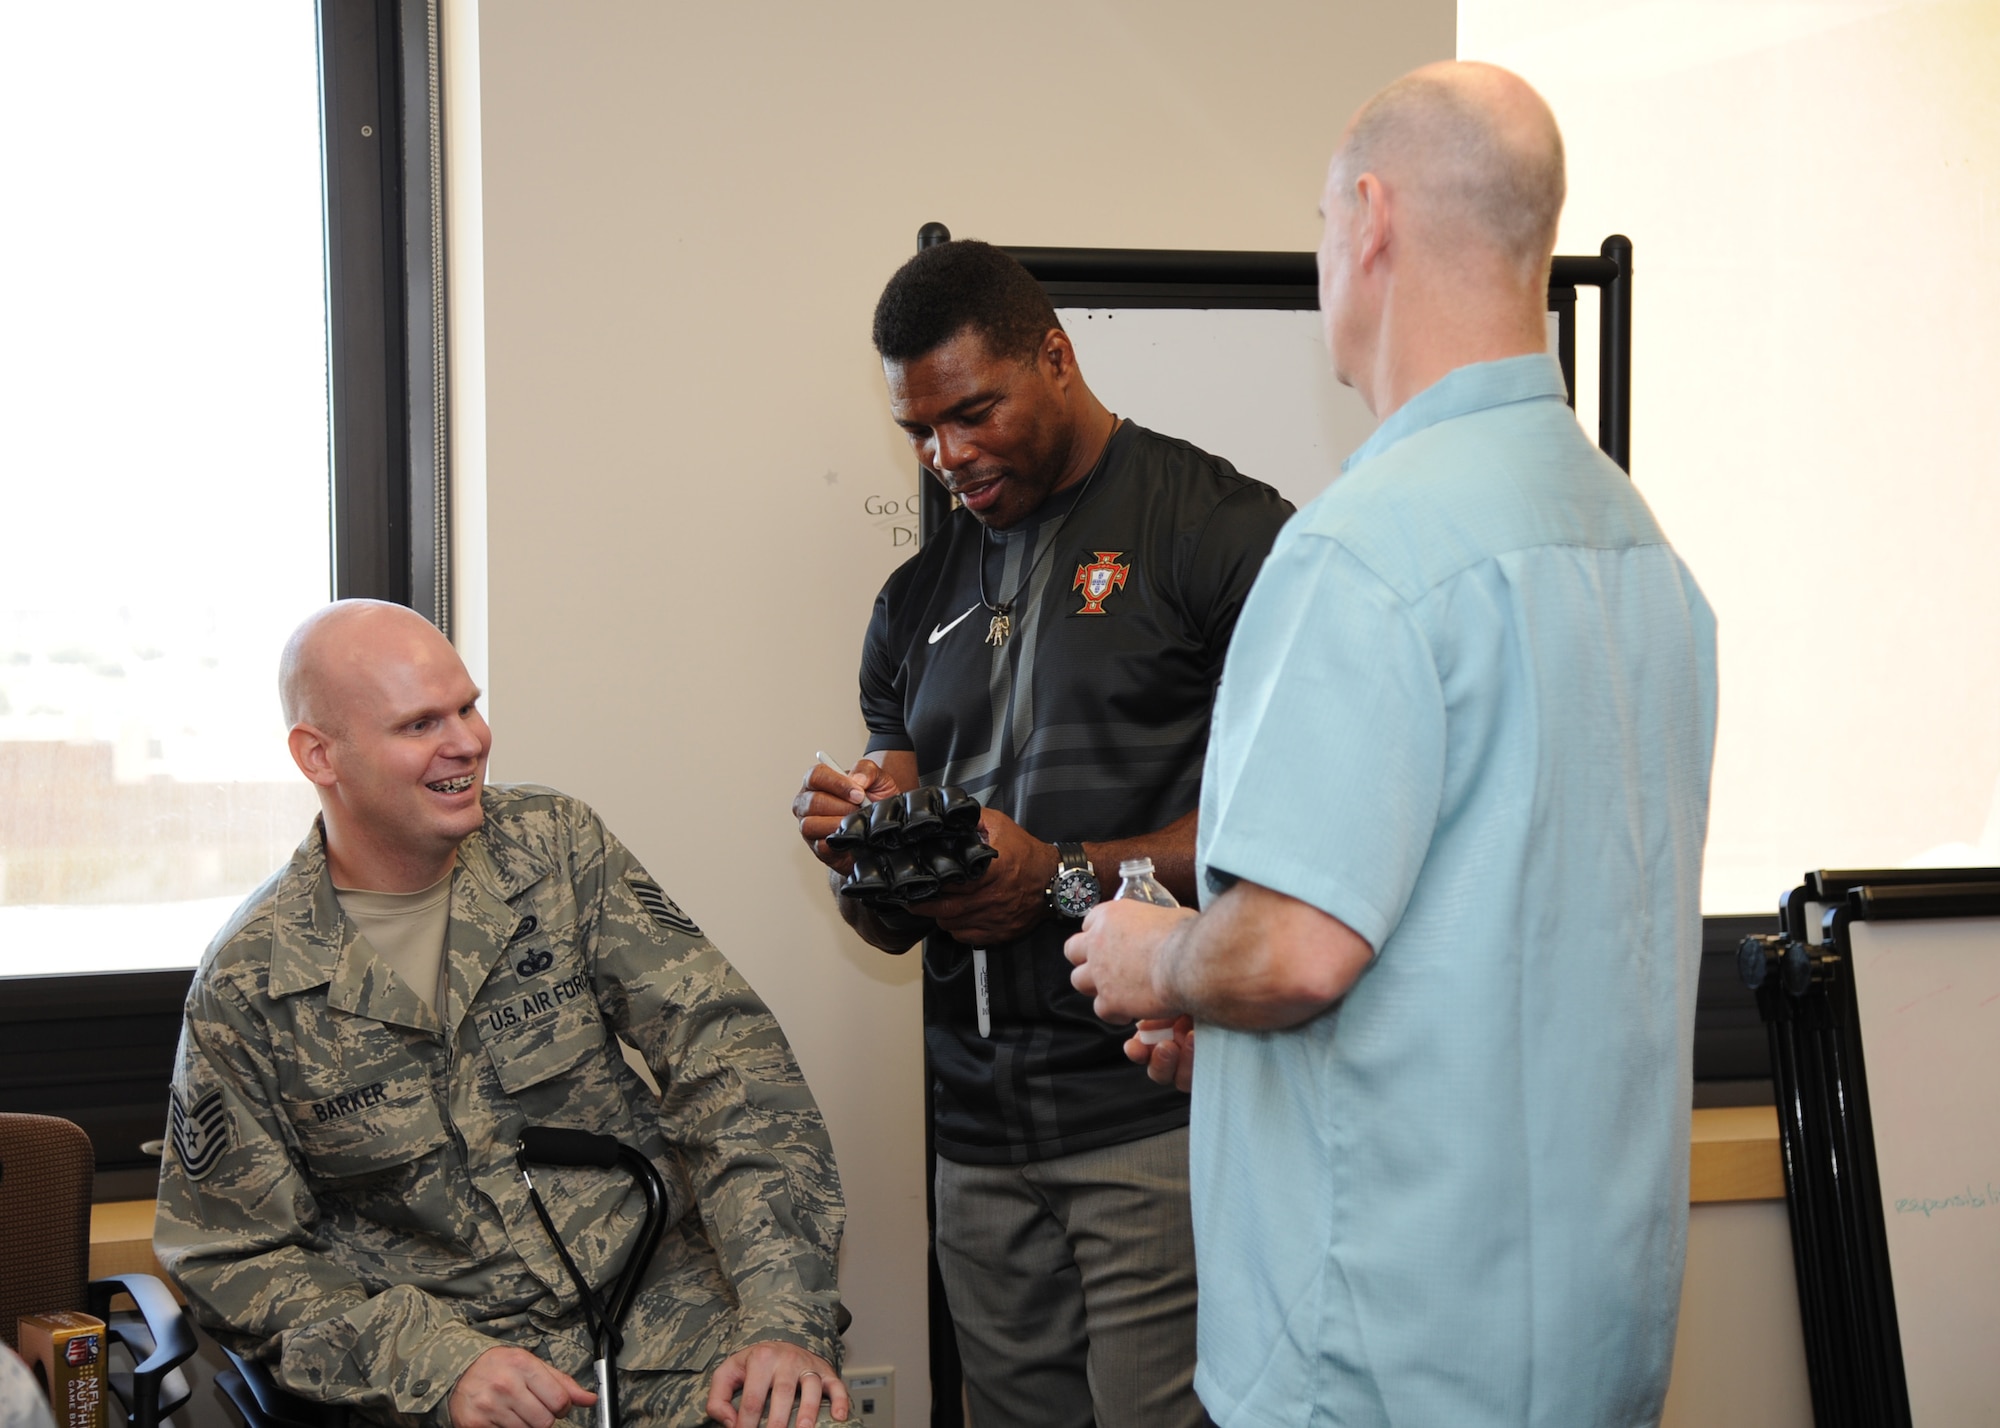 Herschel Walker, center, signs an autograph for Tech. Sgt. Christopher Barker, 59th Medical Wing Patient Squadron, and his father Daniel Barker during a recent visit to the Wilford Hall Ambulatory Surgical Center Oct. 23, 2013, at Joint Base San Antonio-Lackland, Texas. Earlier in the day, Barker was presented with the distinguished Purple Heart for wounds sustained in action. (U.S. Air Force photo/Staff Sgt. Jerilyn Quintanilla)